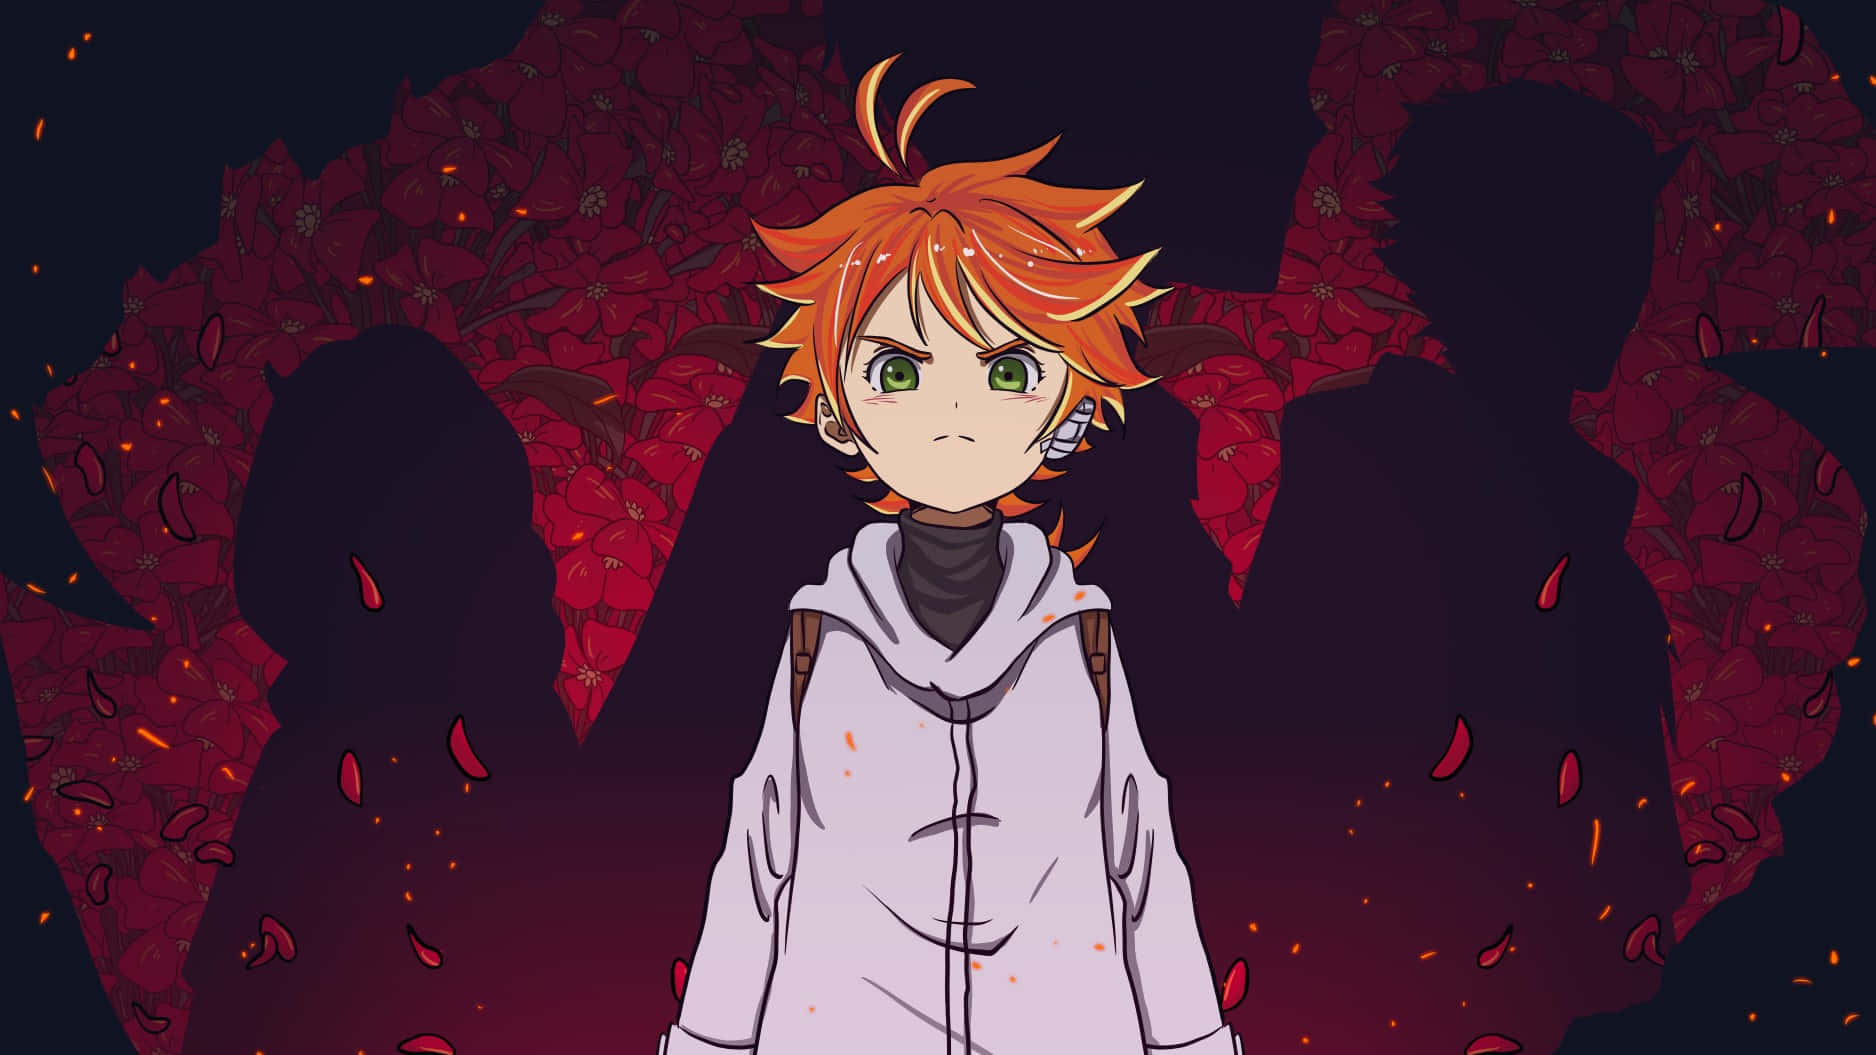 Emma from "The Promised Neverland" Wallpaper